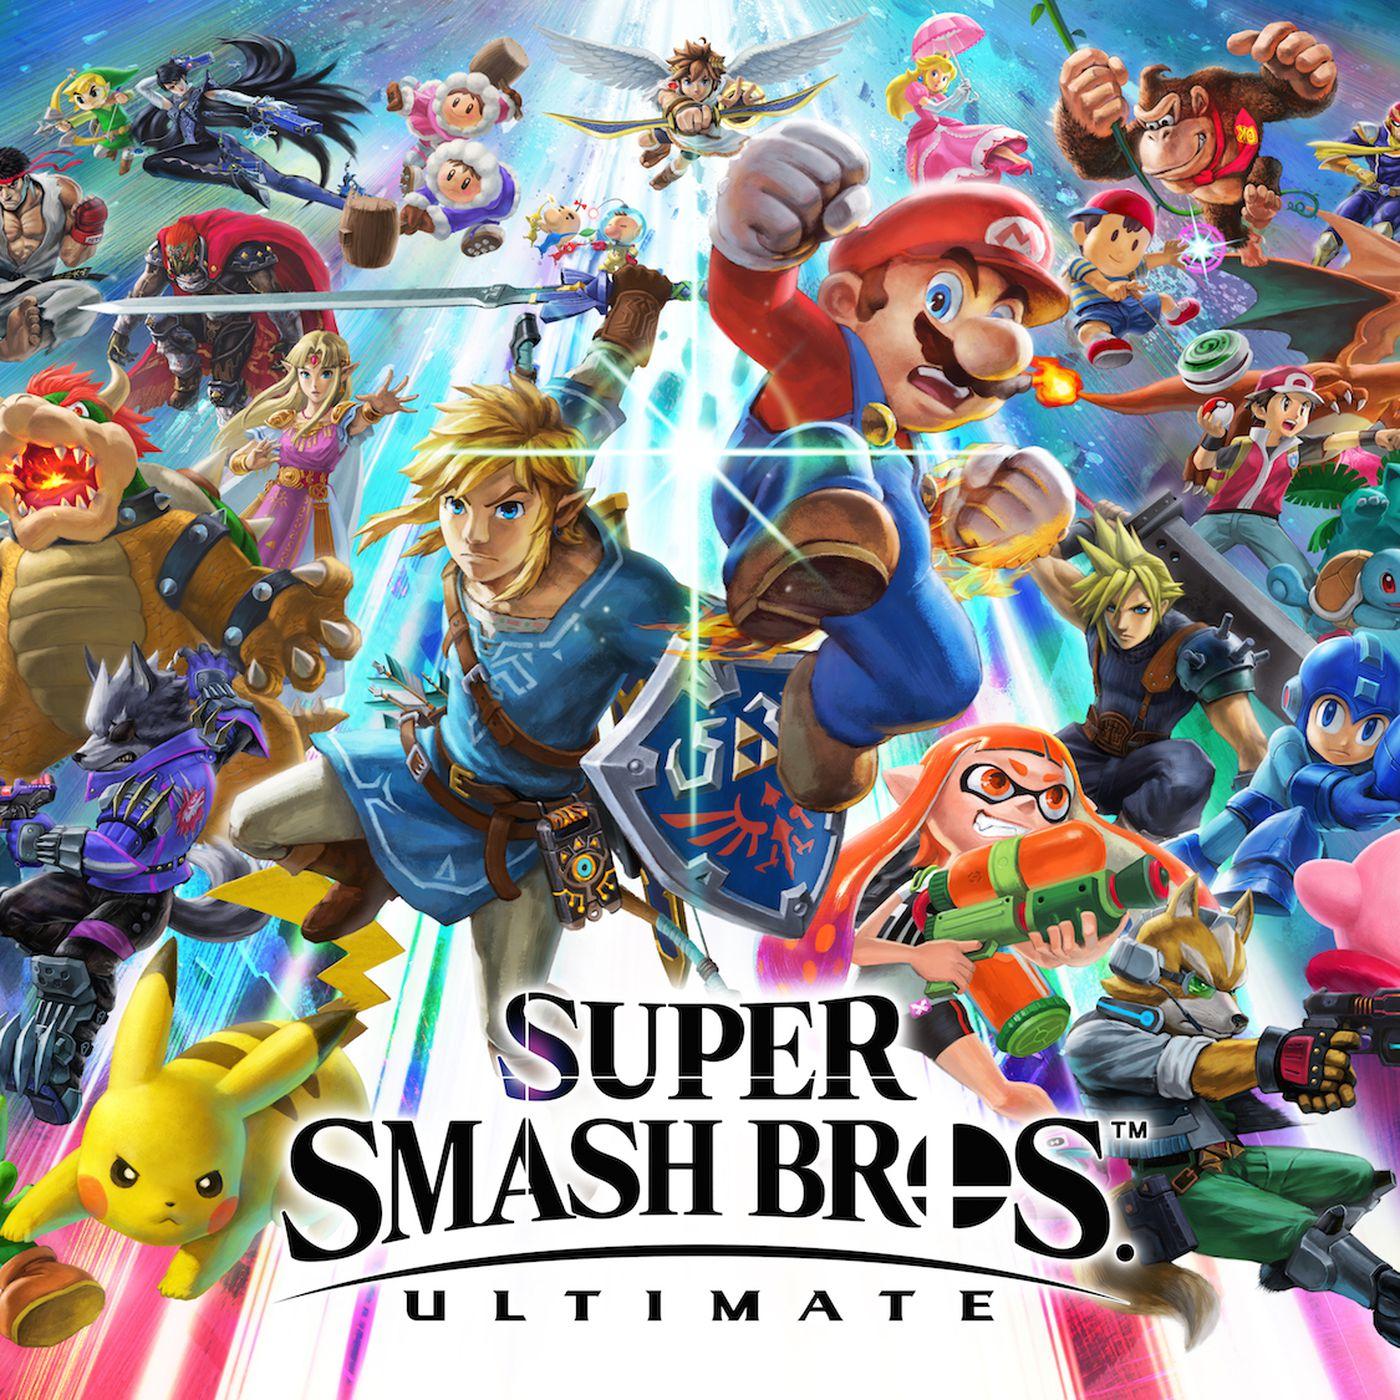 Why Super Smash Bros. Ultimate was such a daunting game for its